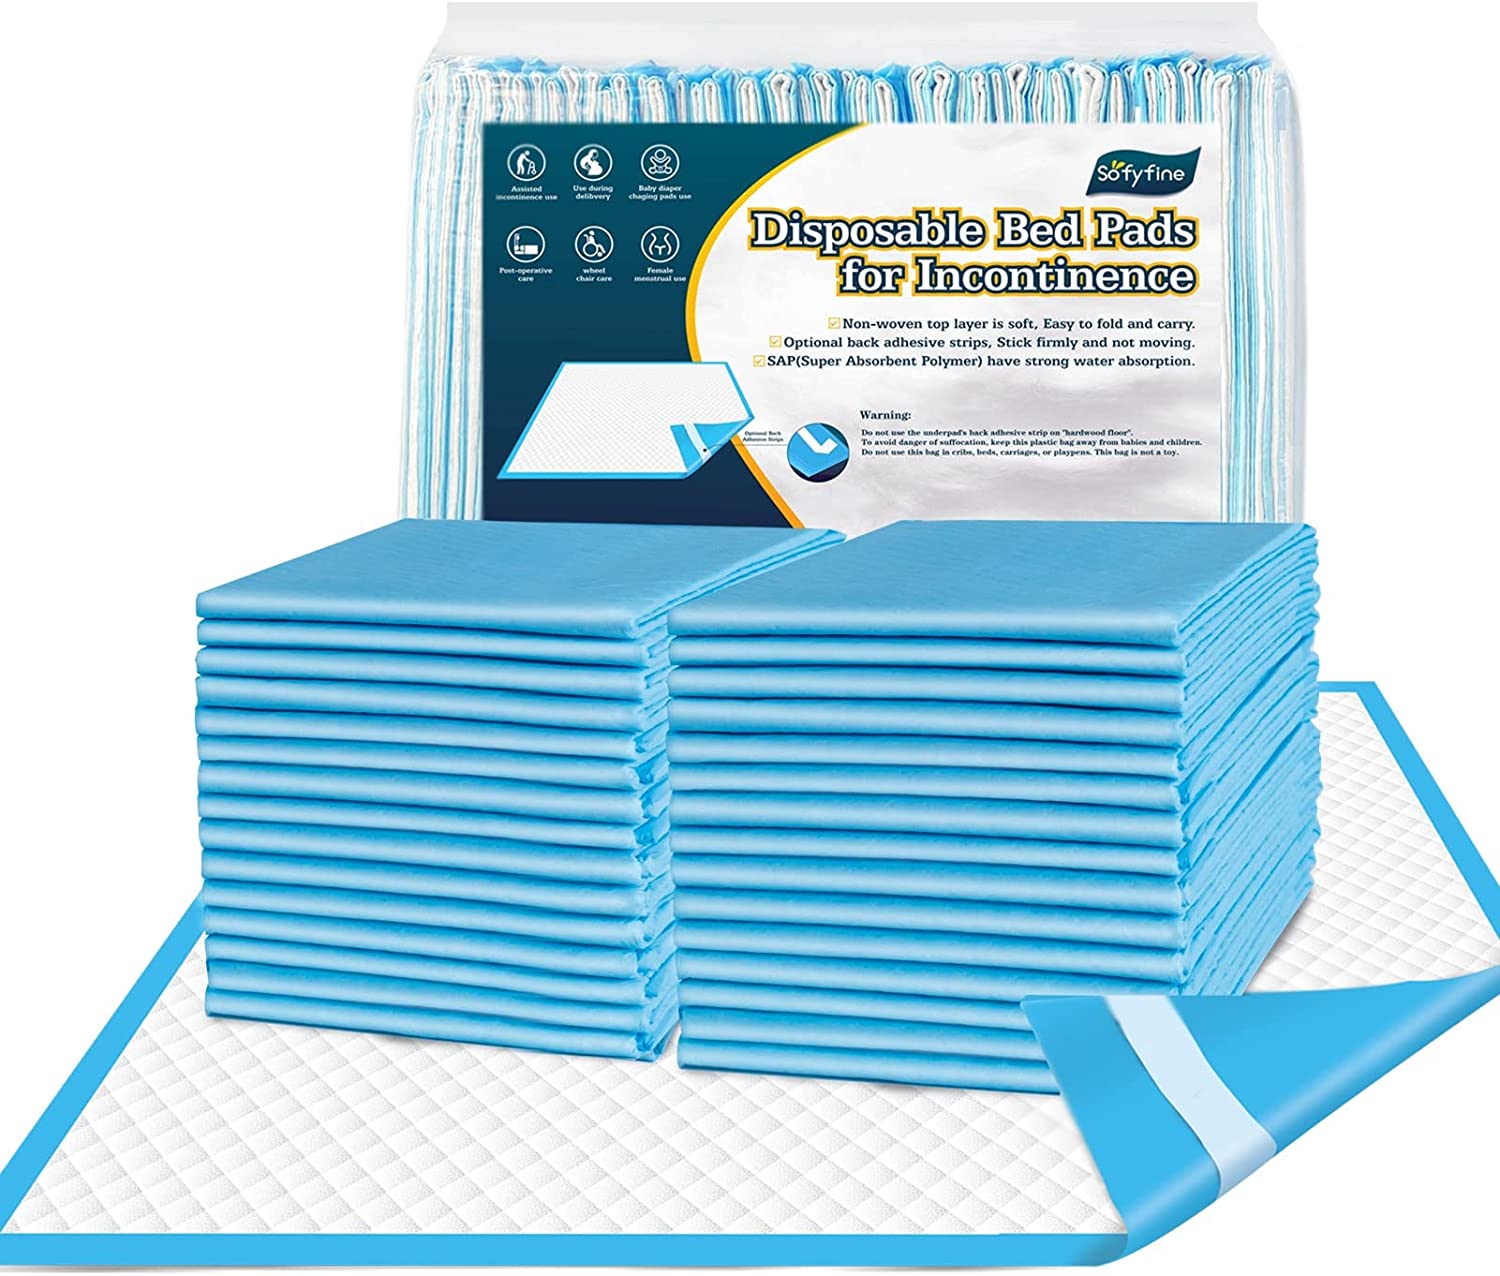 SOFYFINE Disposable Bed Pads 30 X 36 (50 Count), Extra Large Thicken Hospital Pads for Incontinence, Ultra Absorbent Changing Underpads for Adults, Elderly, Baby and Pet (Blue, 80g/Piece, 6g SAP)